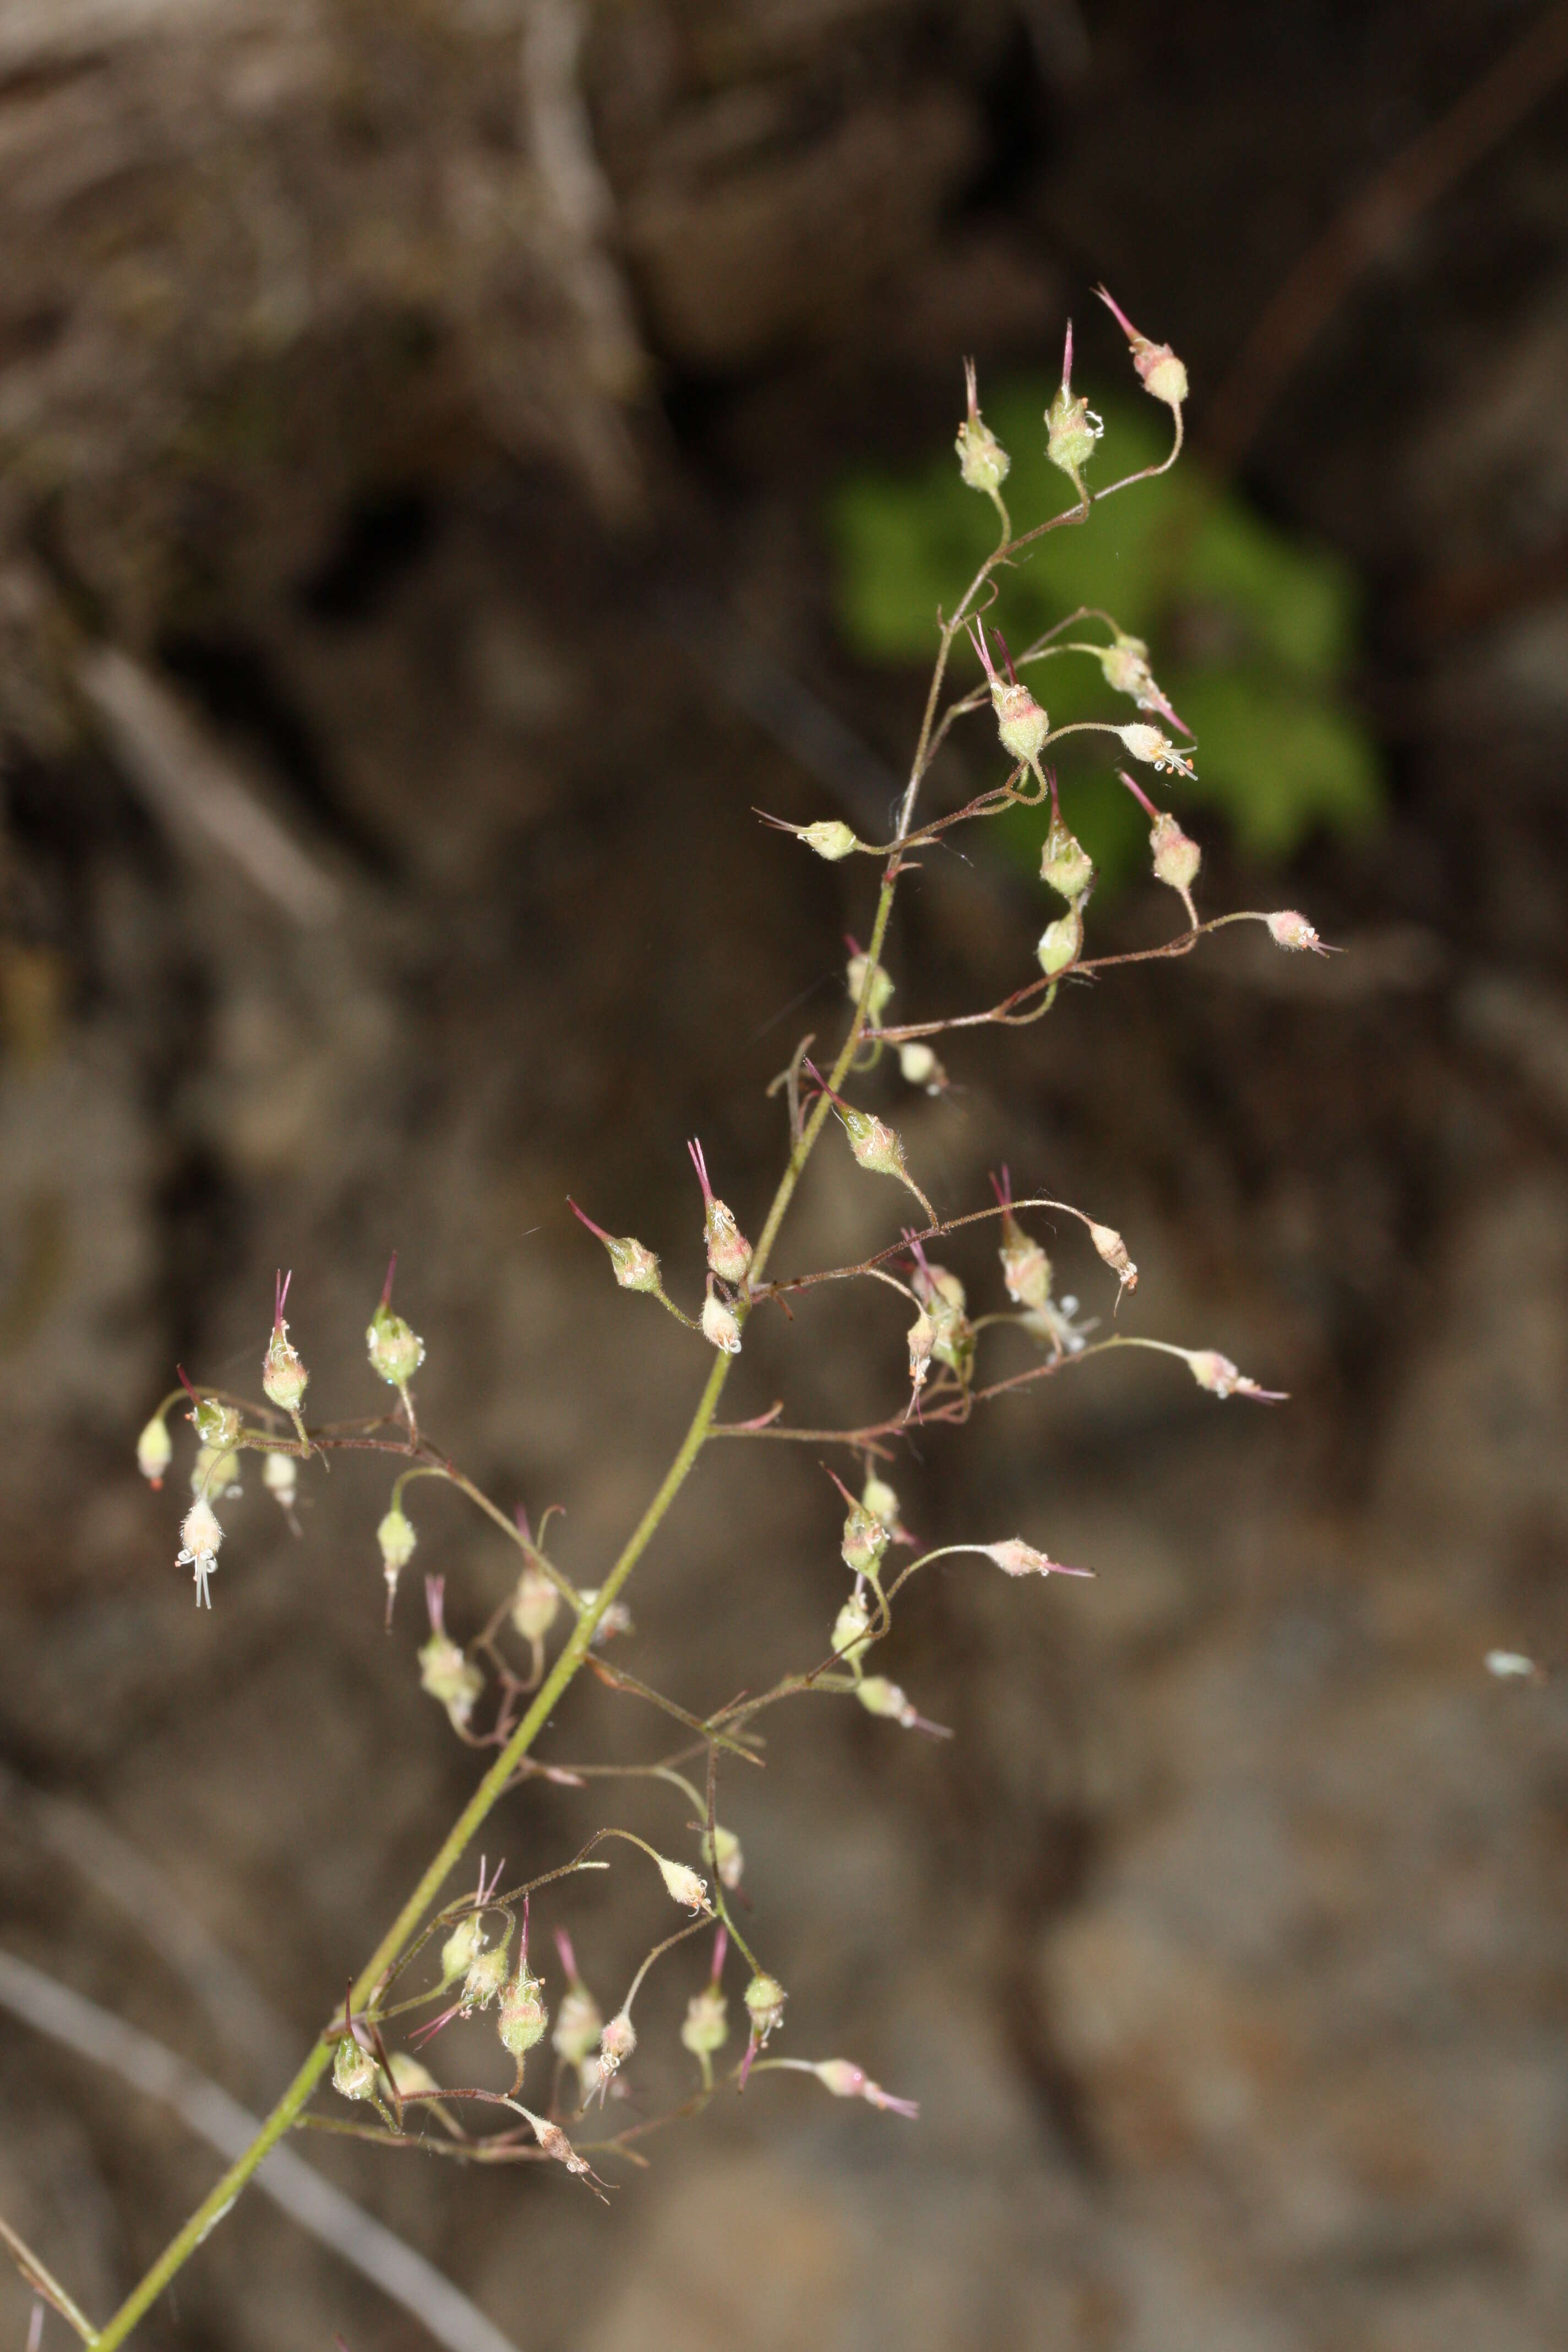 Image of crevice alumroot